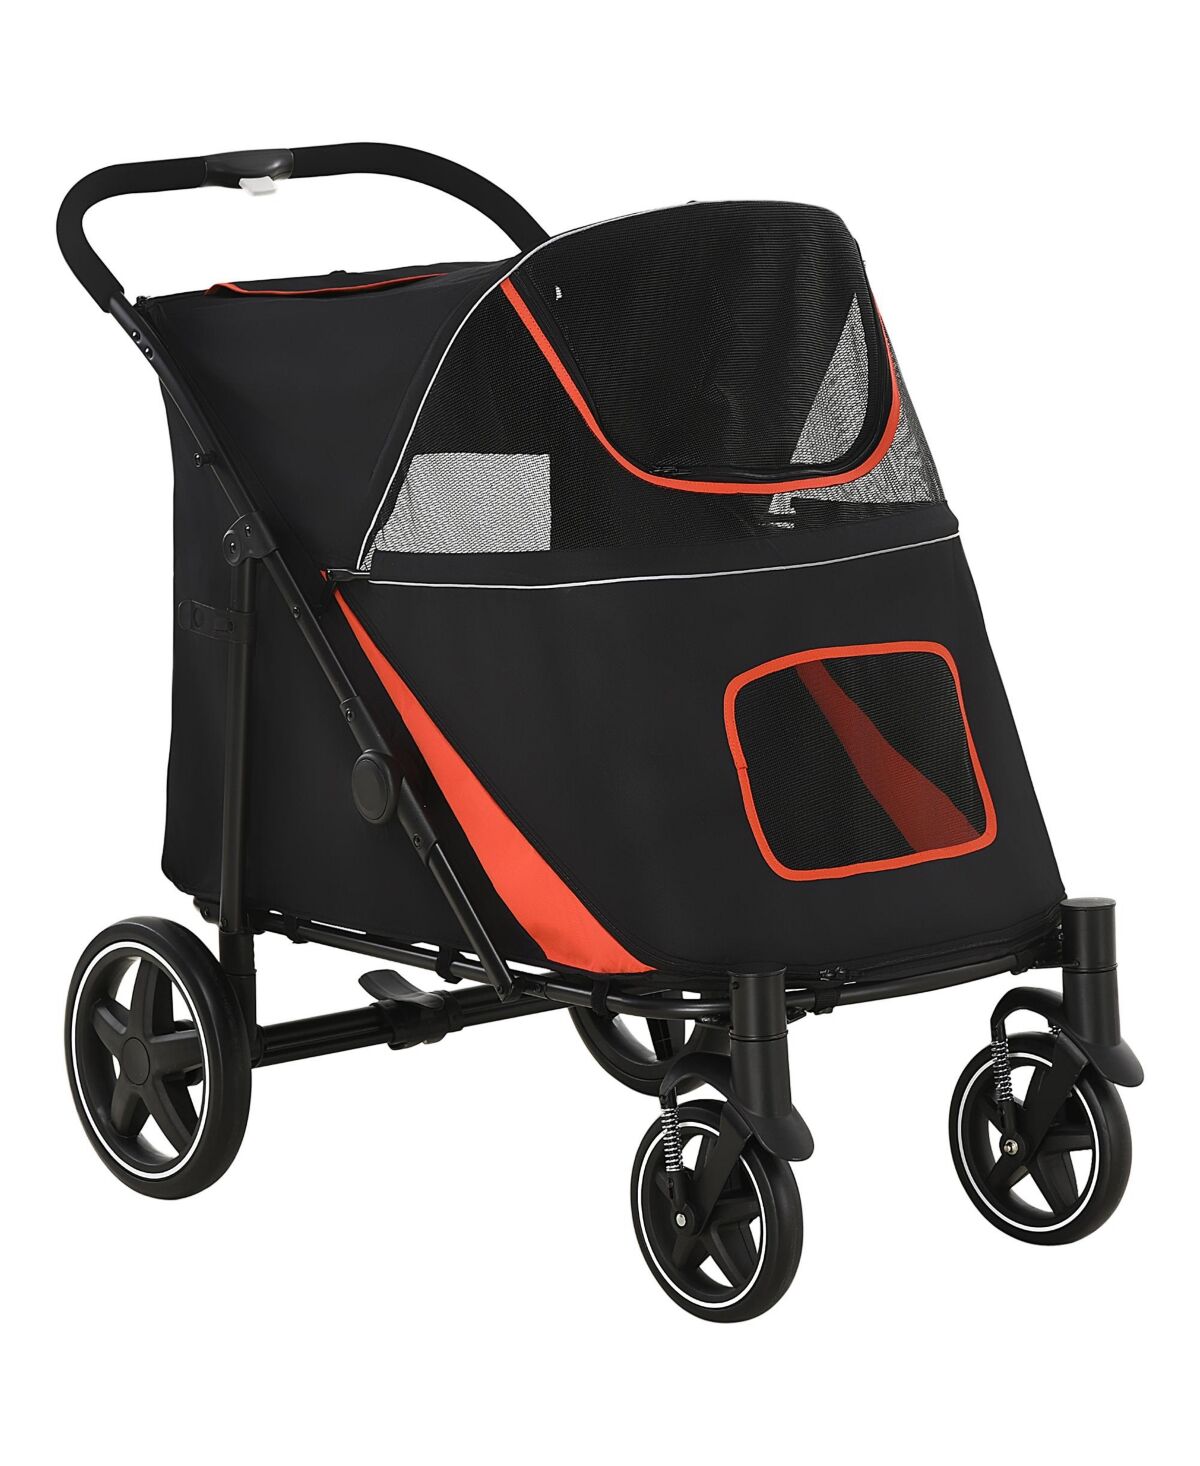 Pawhut Paw Hut 1-Click Foldable Doggy Stroller for Medium Large Dogs, Pet Stroller with Storage, Smooth Ride with Shock Absorption, Mesh Window, Safety Leash